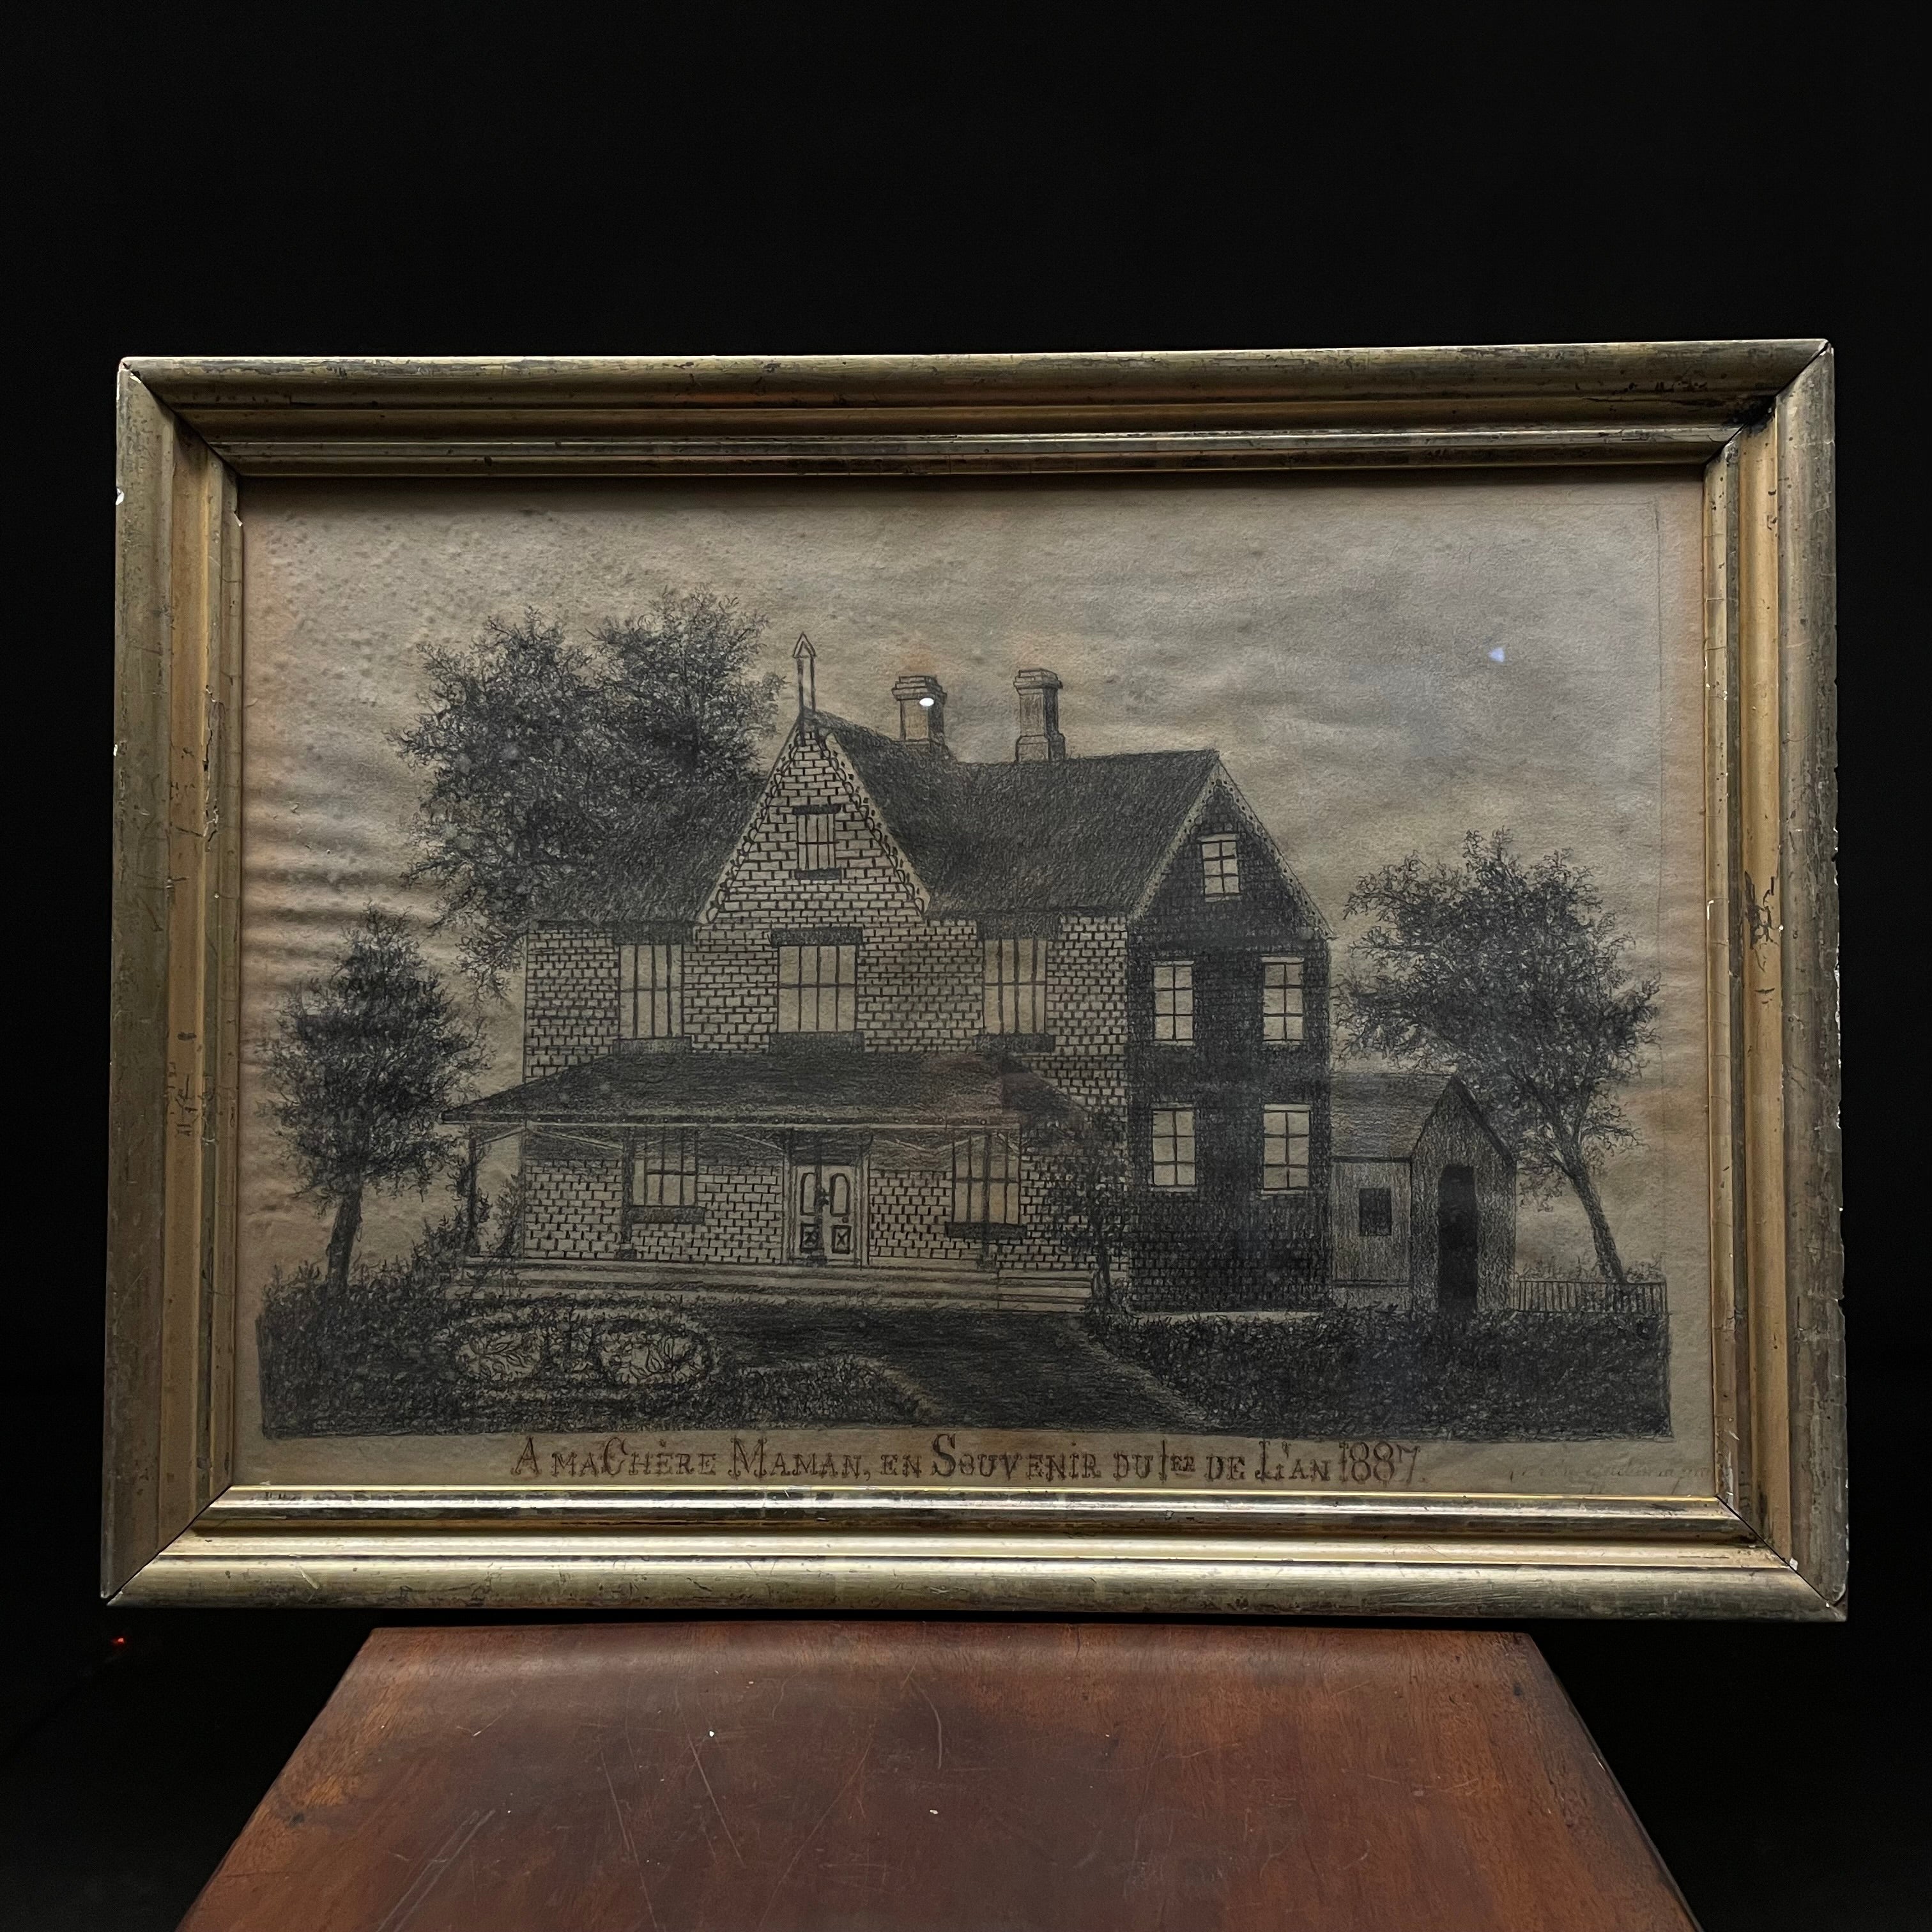 19th century house sketch Drawing dated 1881